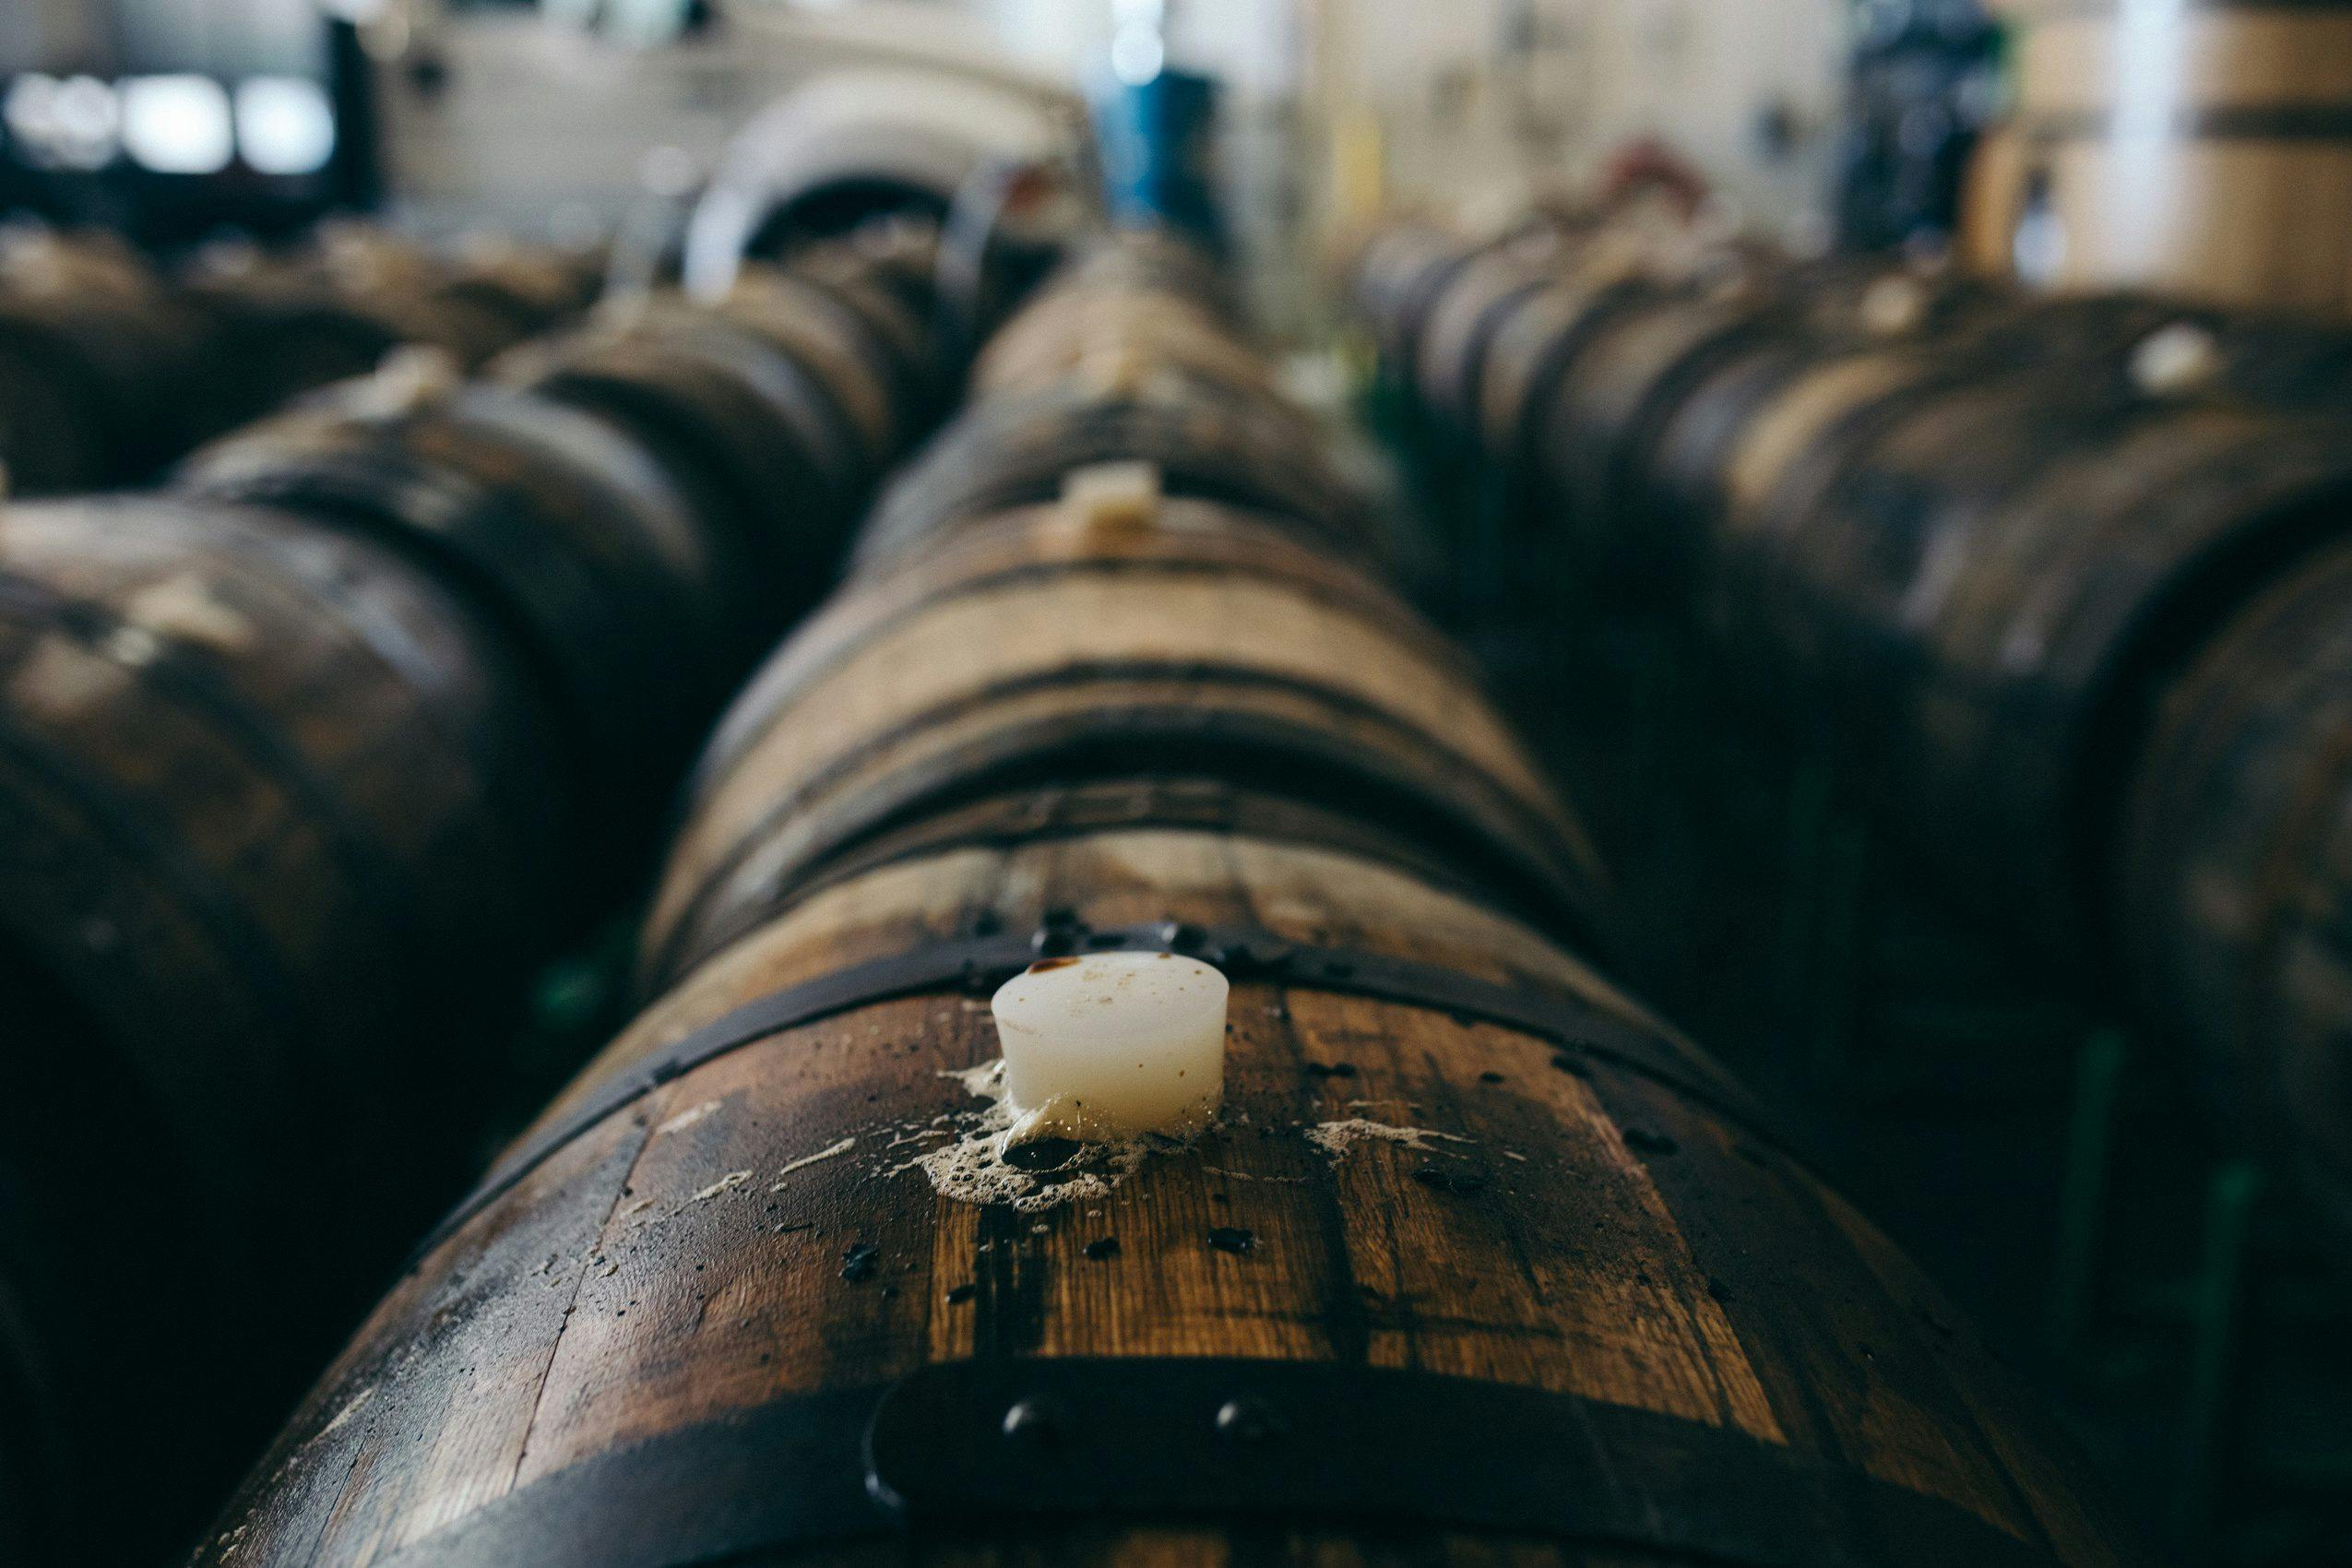 Sierra Nevada brewer pouring a barrel aged beer sample from a wooden barrel